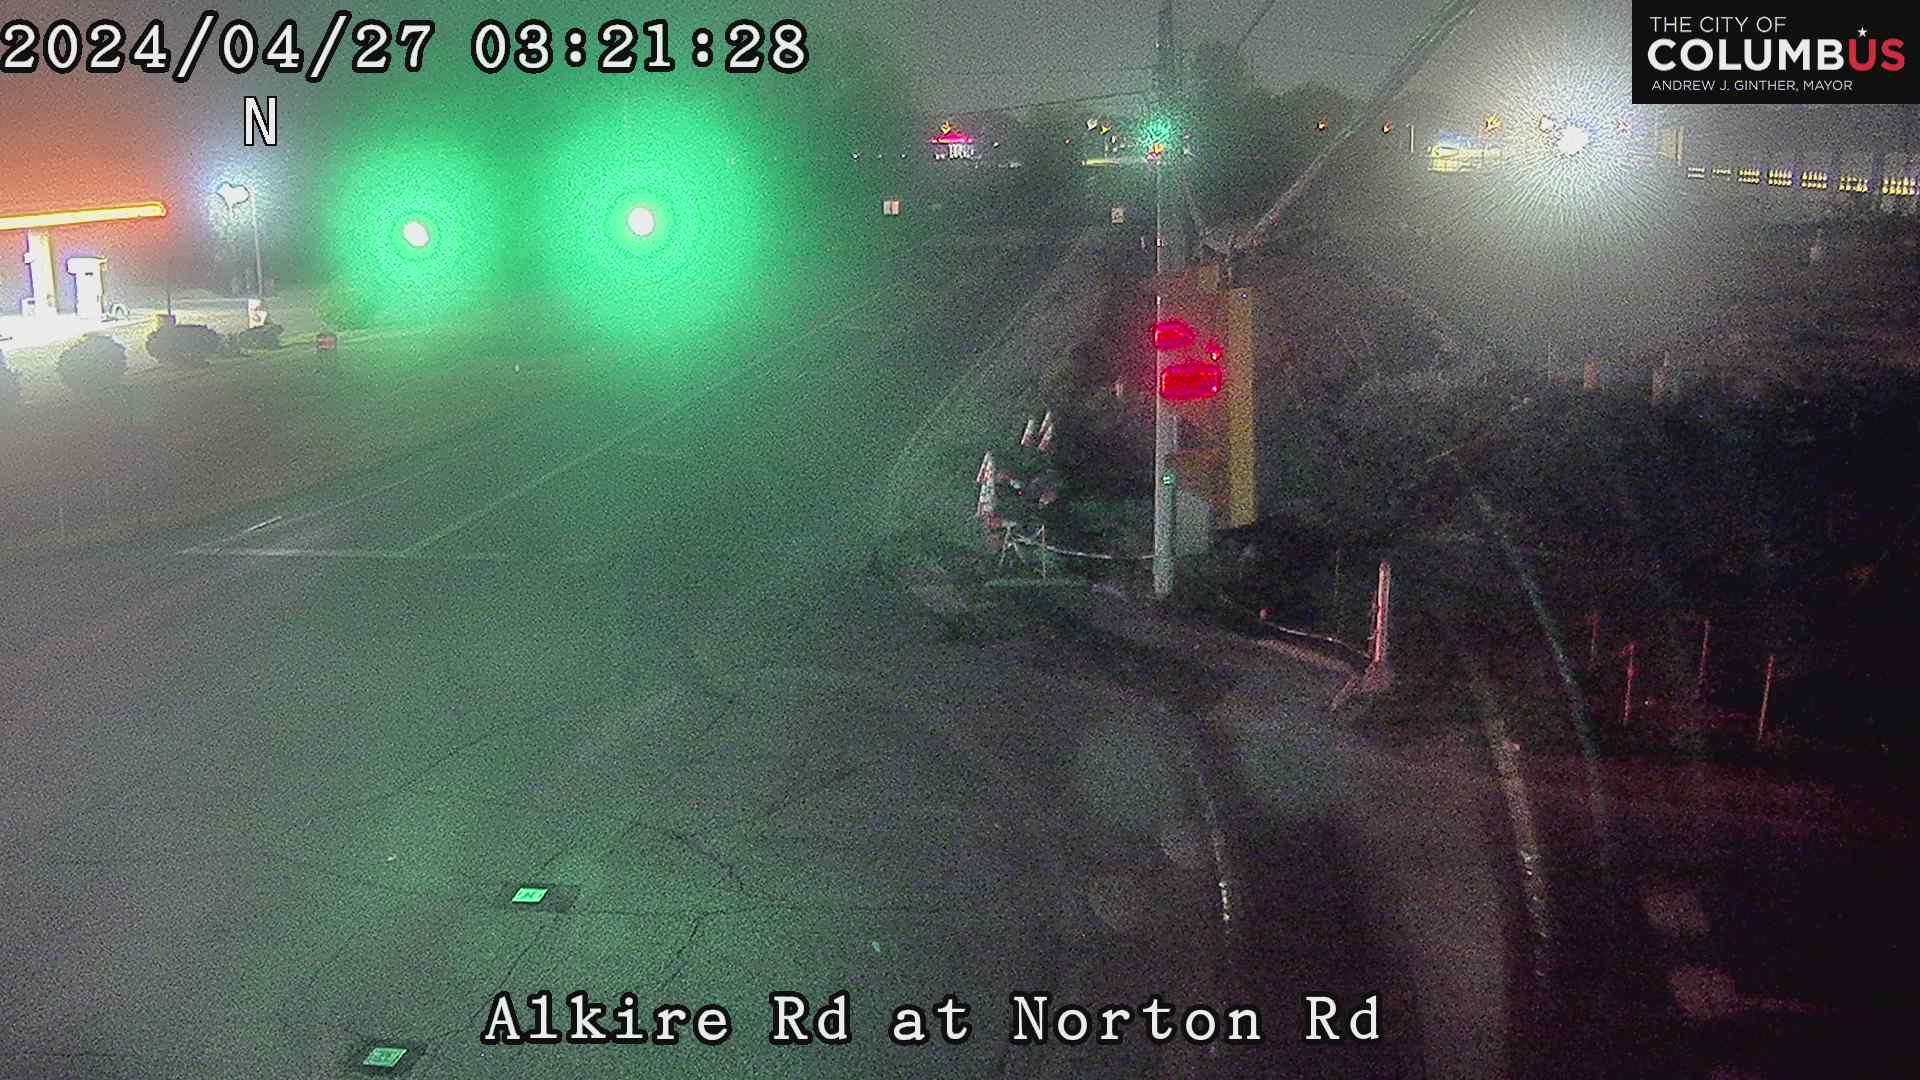 Traffic Cam Columbus: City of - Alkire Rd at Norton Rd Player